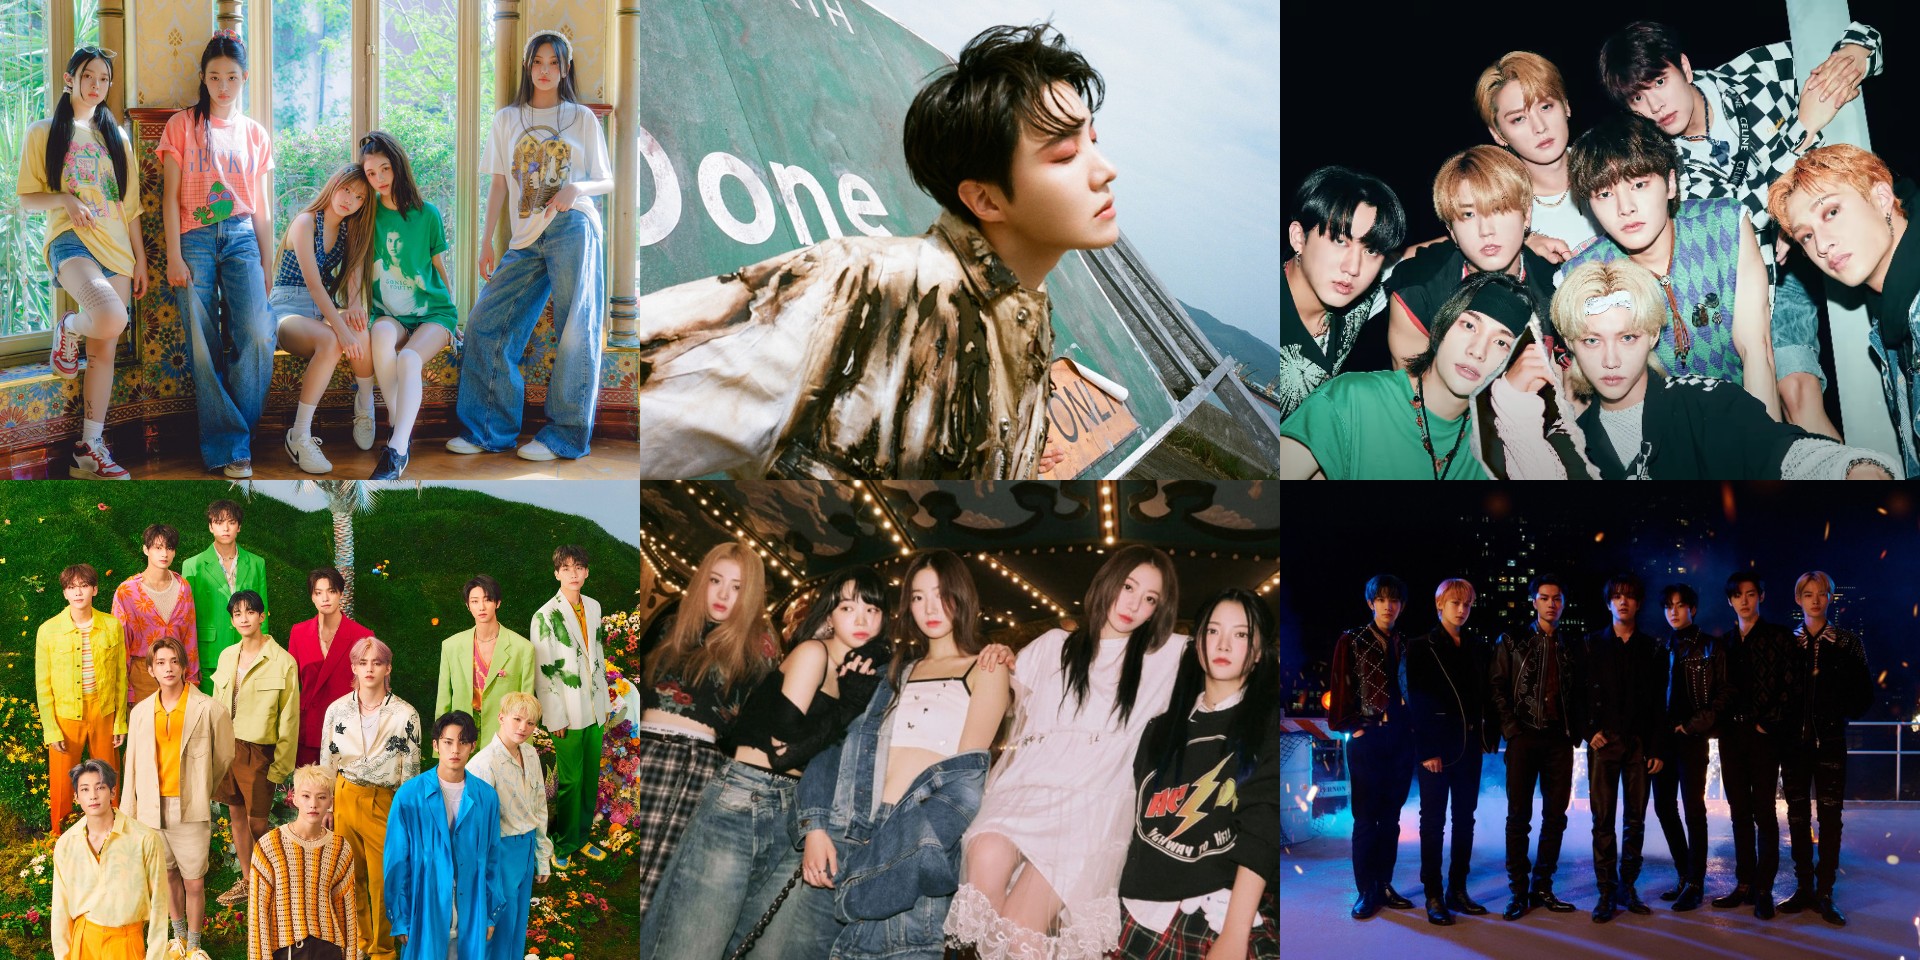 j-hope, SEVENTEEN, ENHYPEN, Stray Kids, LE SSERAFIM, NewJeans, and more to perform at the 37th Golden Disc Awards